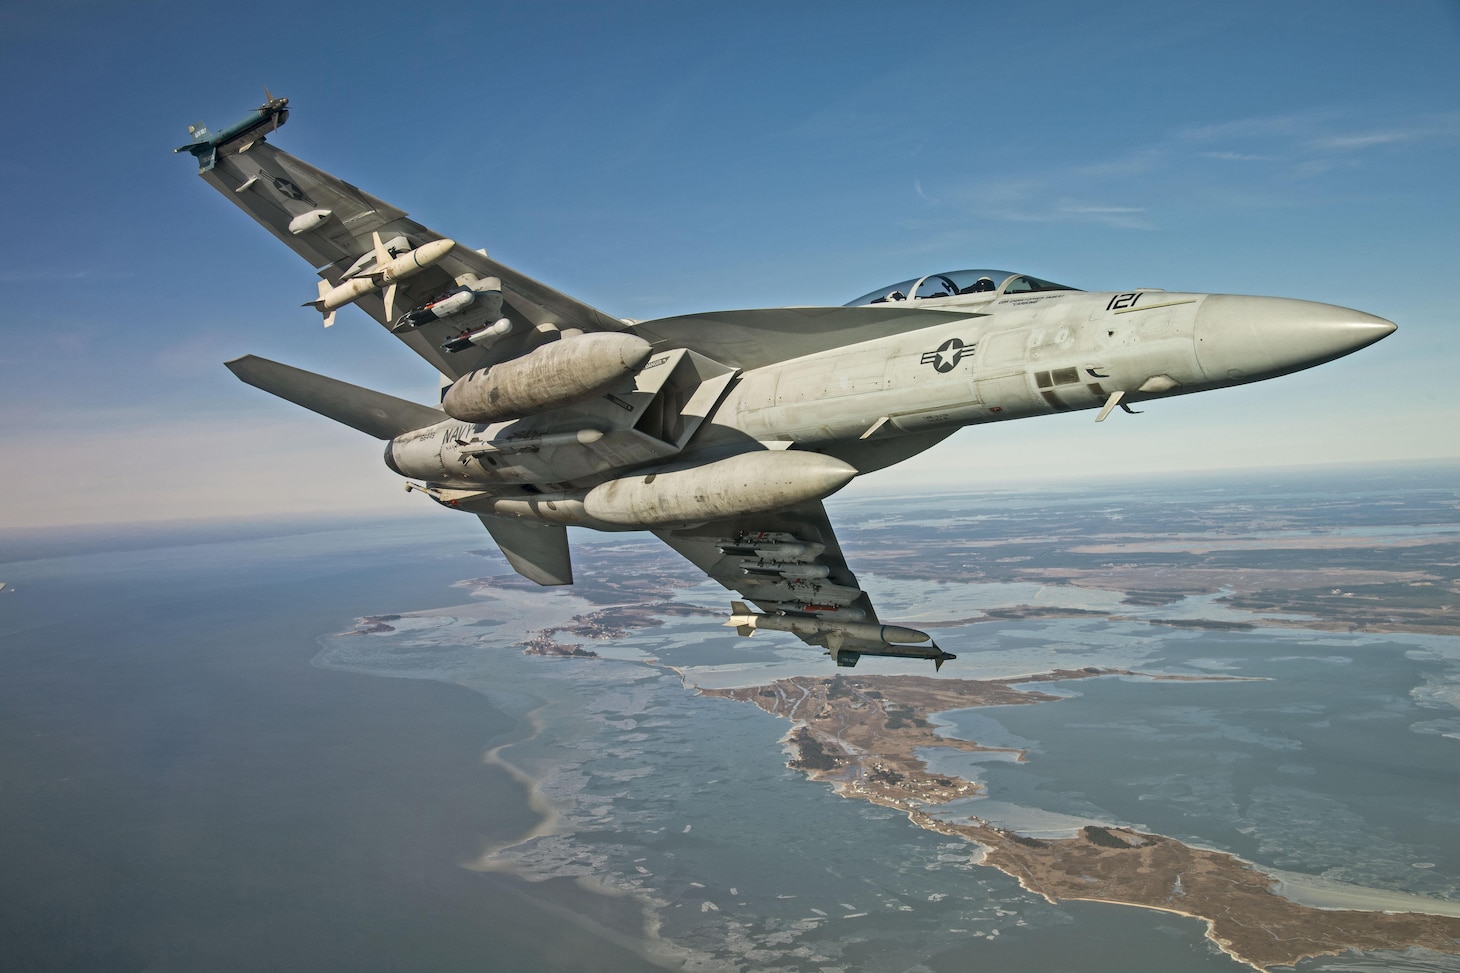 The Navy is set to field the Small Diameter Bomb Increment II on the F/A-18E/F after declaring Early Operational Capability (EOC) in October.